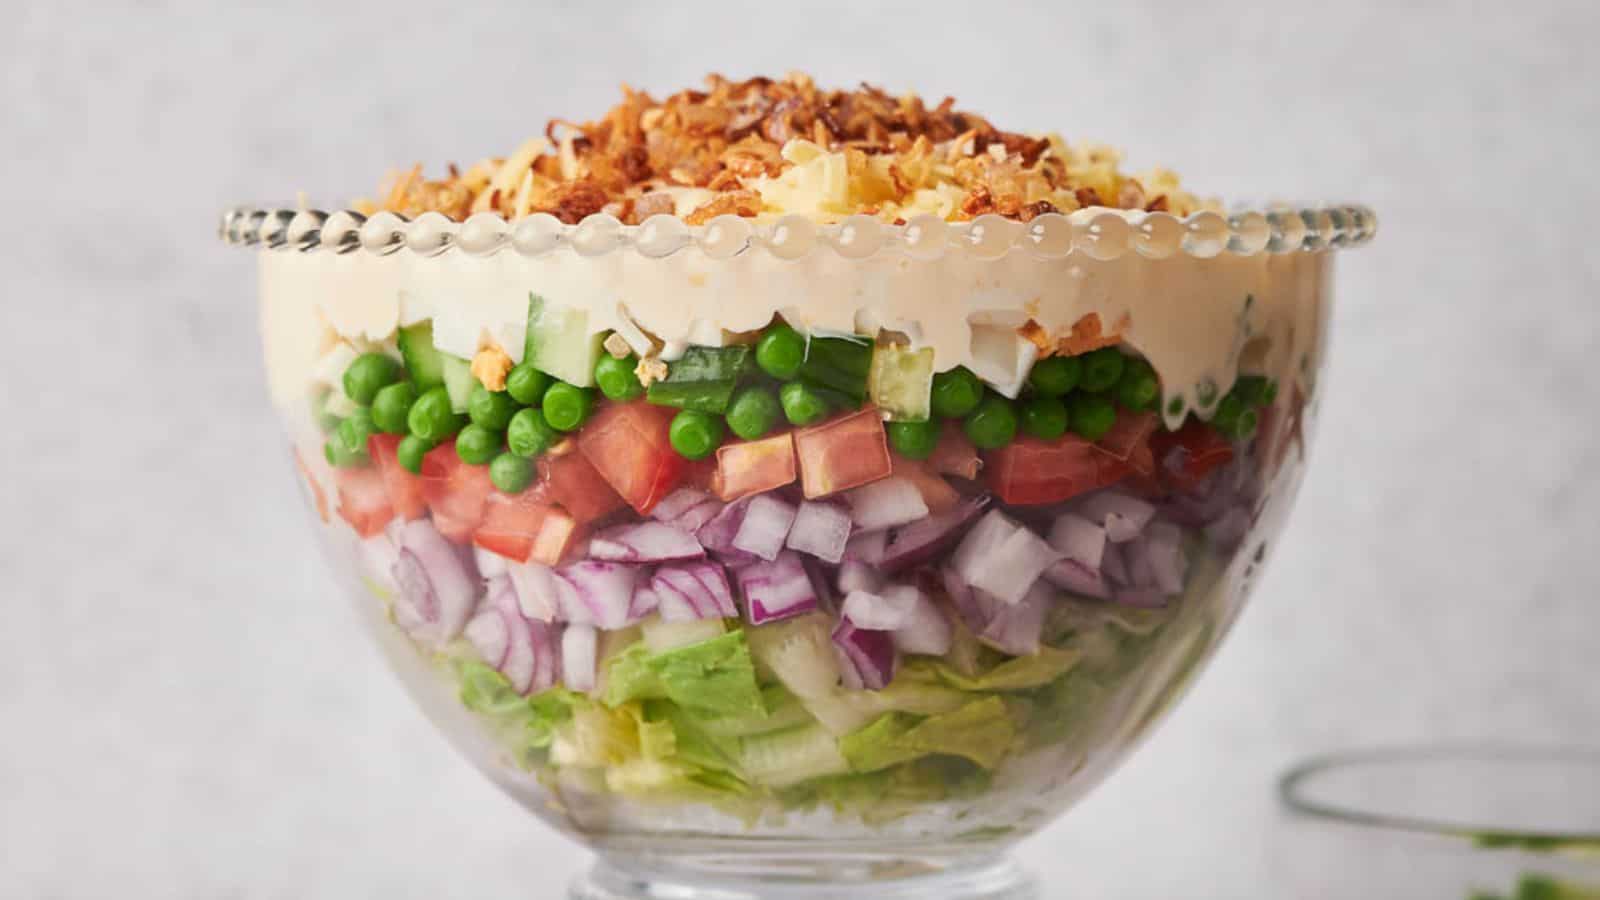 A salad bowl filled with vegetables and peas.